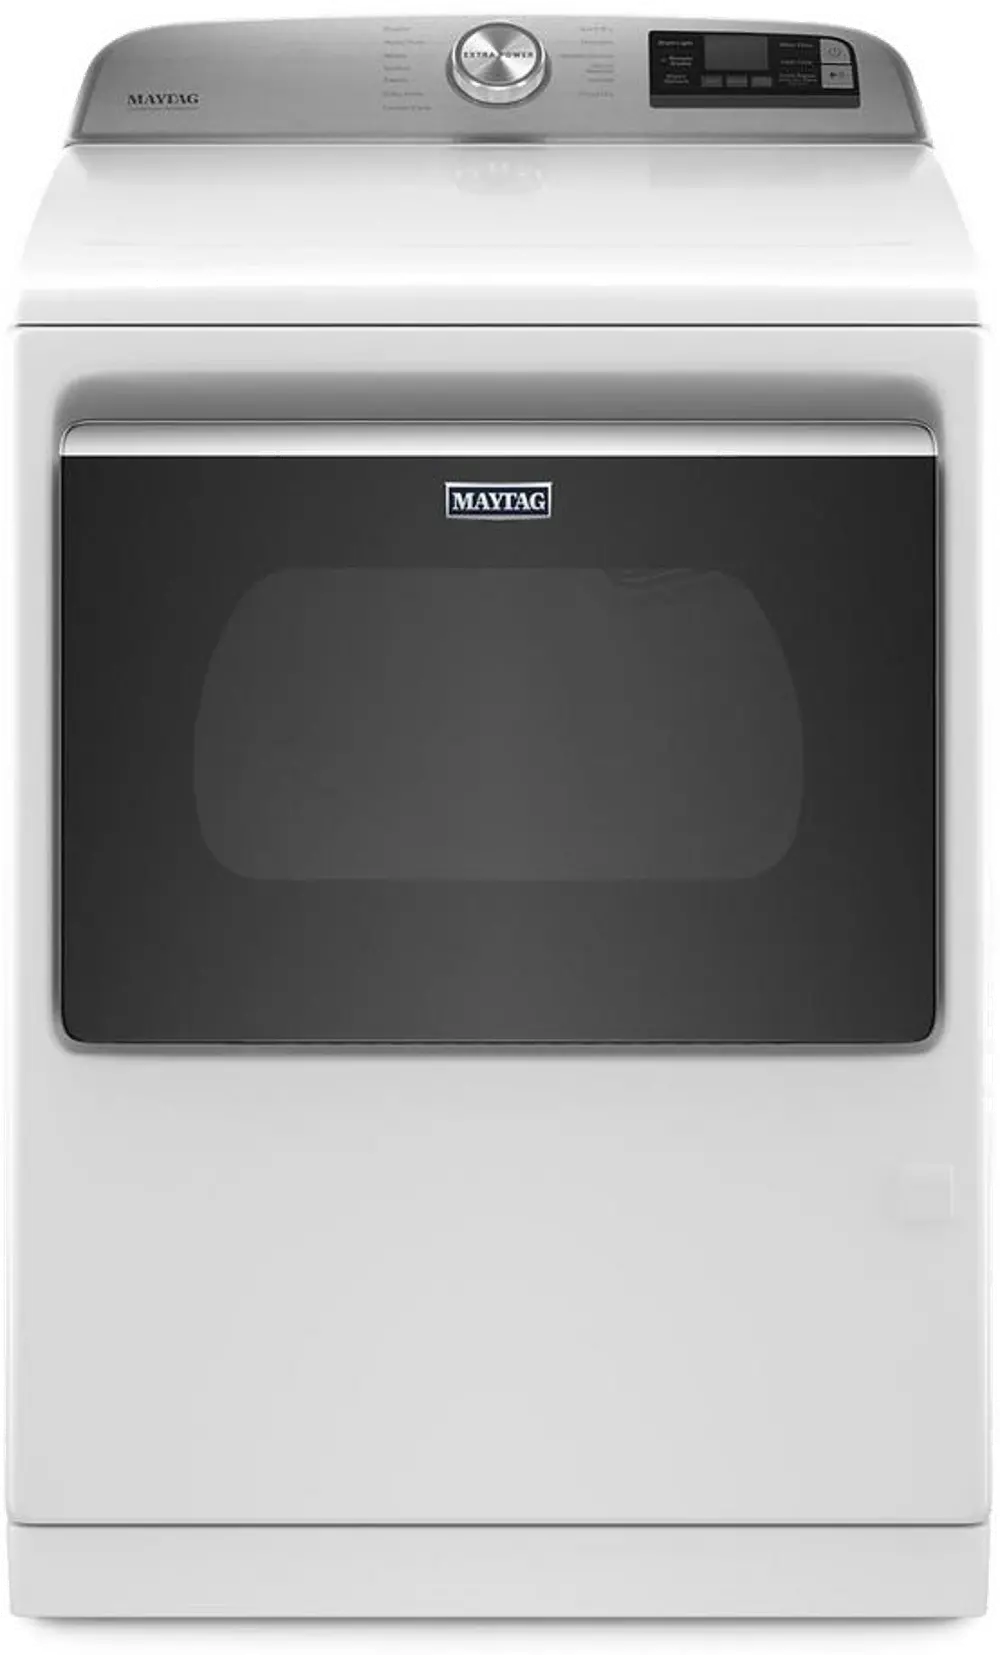 MGD7230HW Maytag Smart Capable Gas Dryer with Extra Power Button - 7.4 Cu. Ft.-1